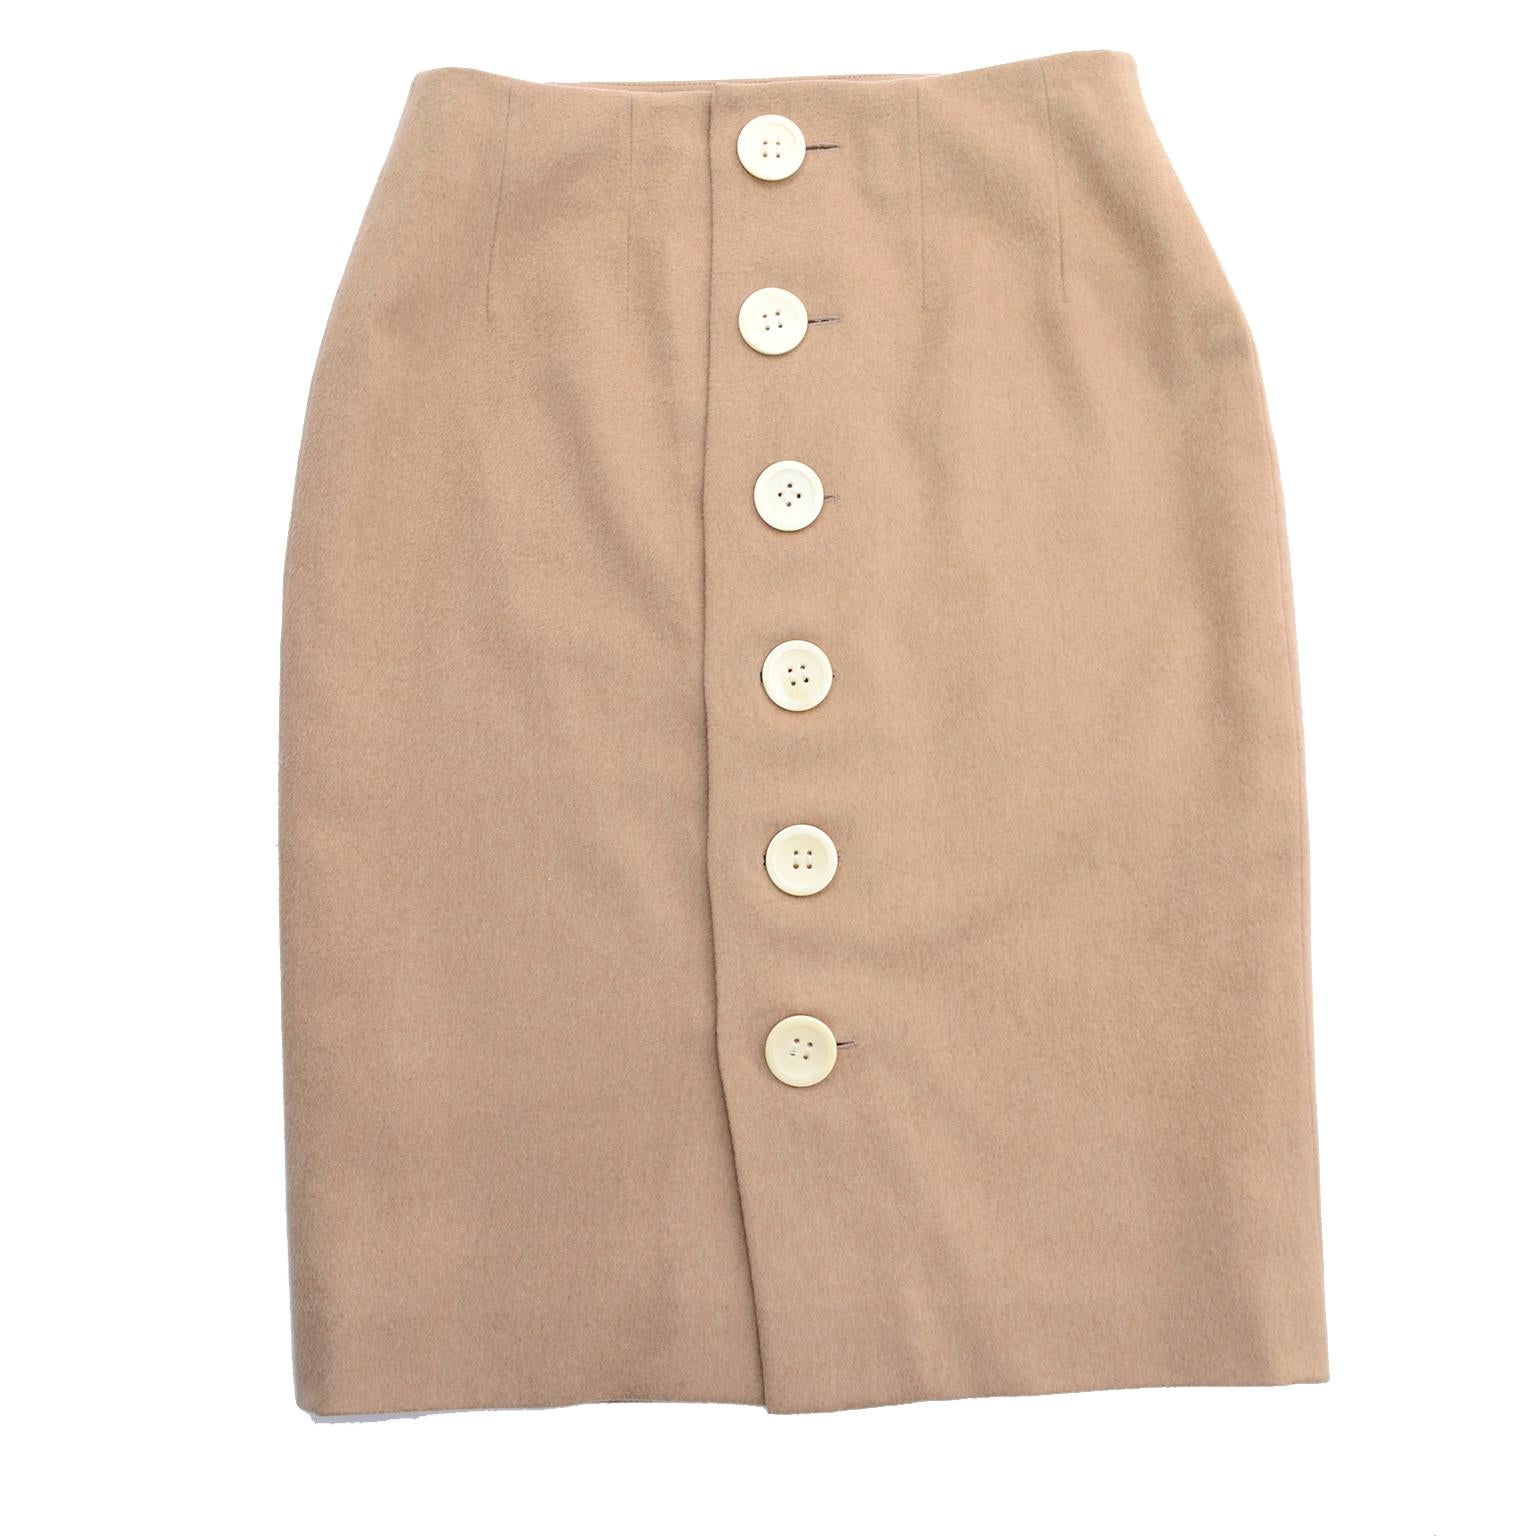 Christian Dior Paris Camel Pencil Skirt With Back Buttons & SIlk Lining Size 8 For Sale 2